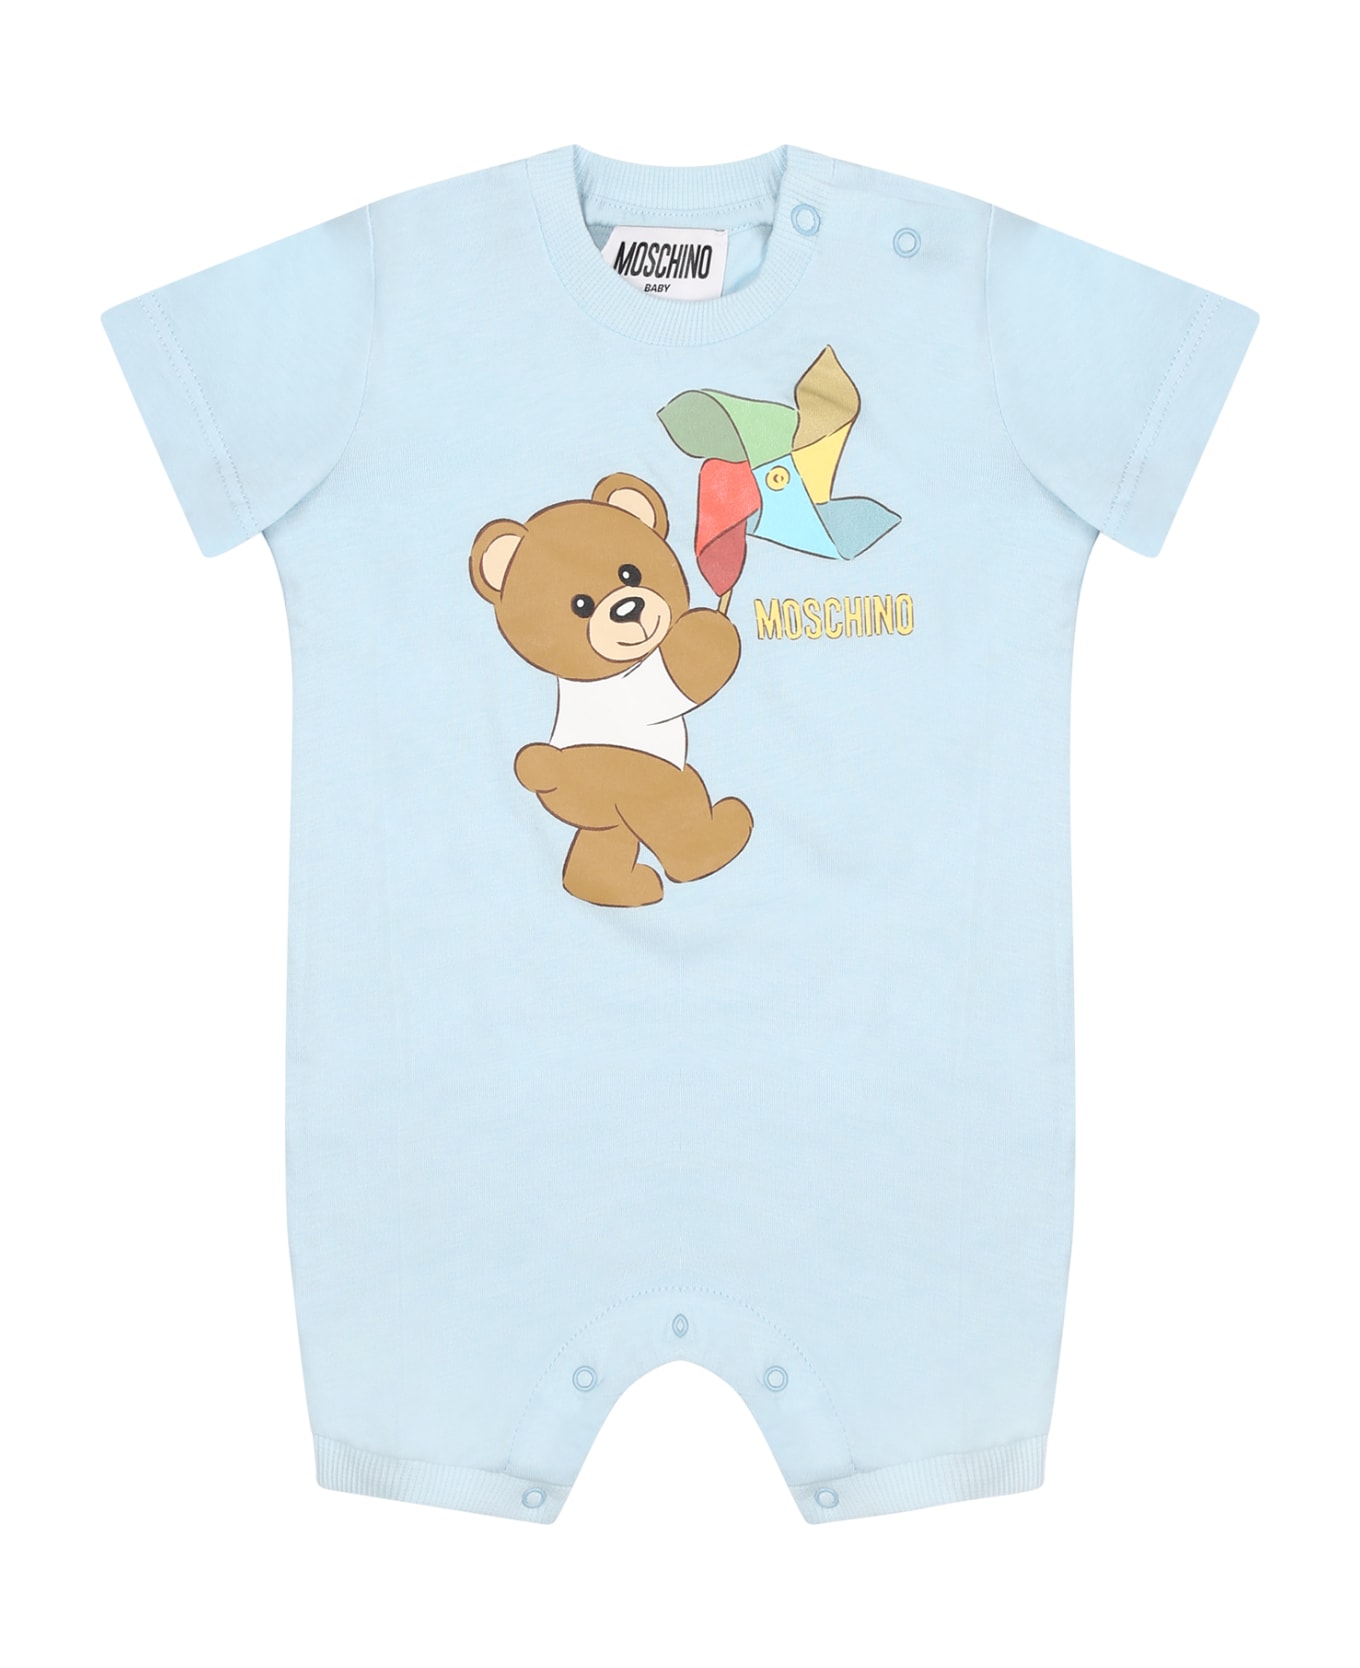 Moschino Light Blue Bodysuit For Baby Boy With Teddy Bear And Pinwheel - Light Blue